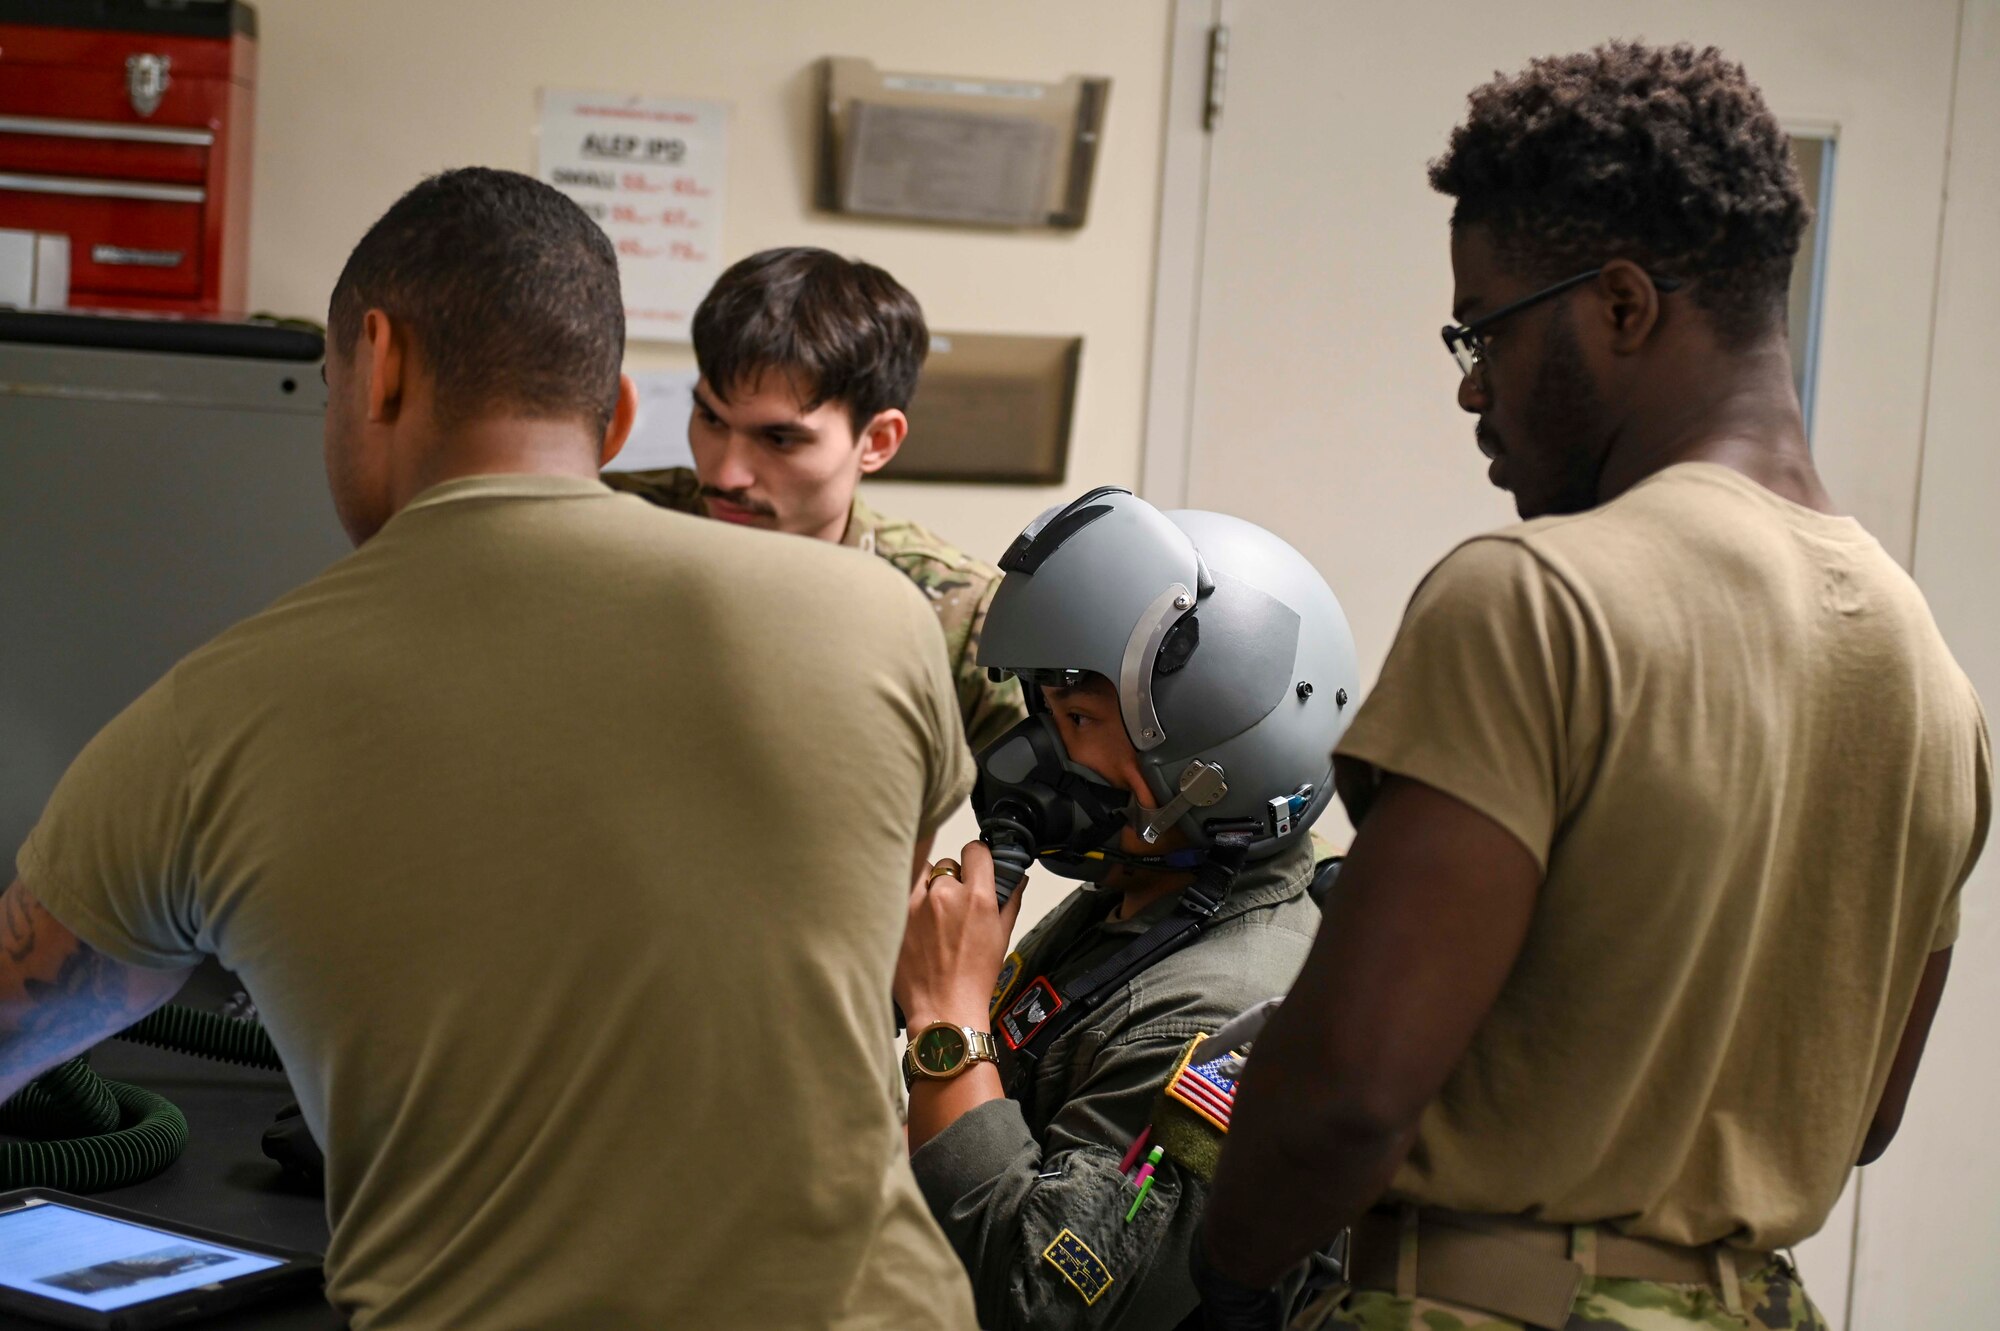 An Airman tries on a mask at an AFE mask fitting.